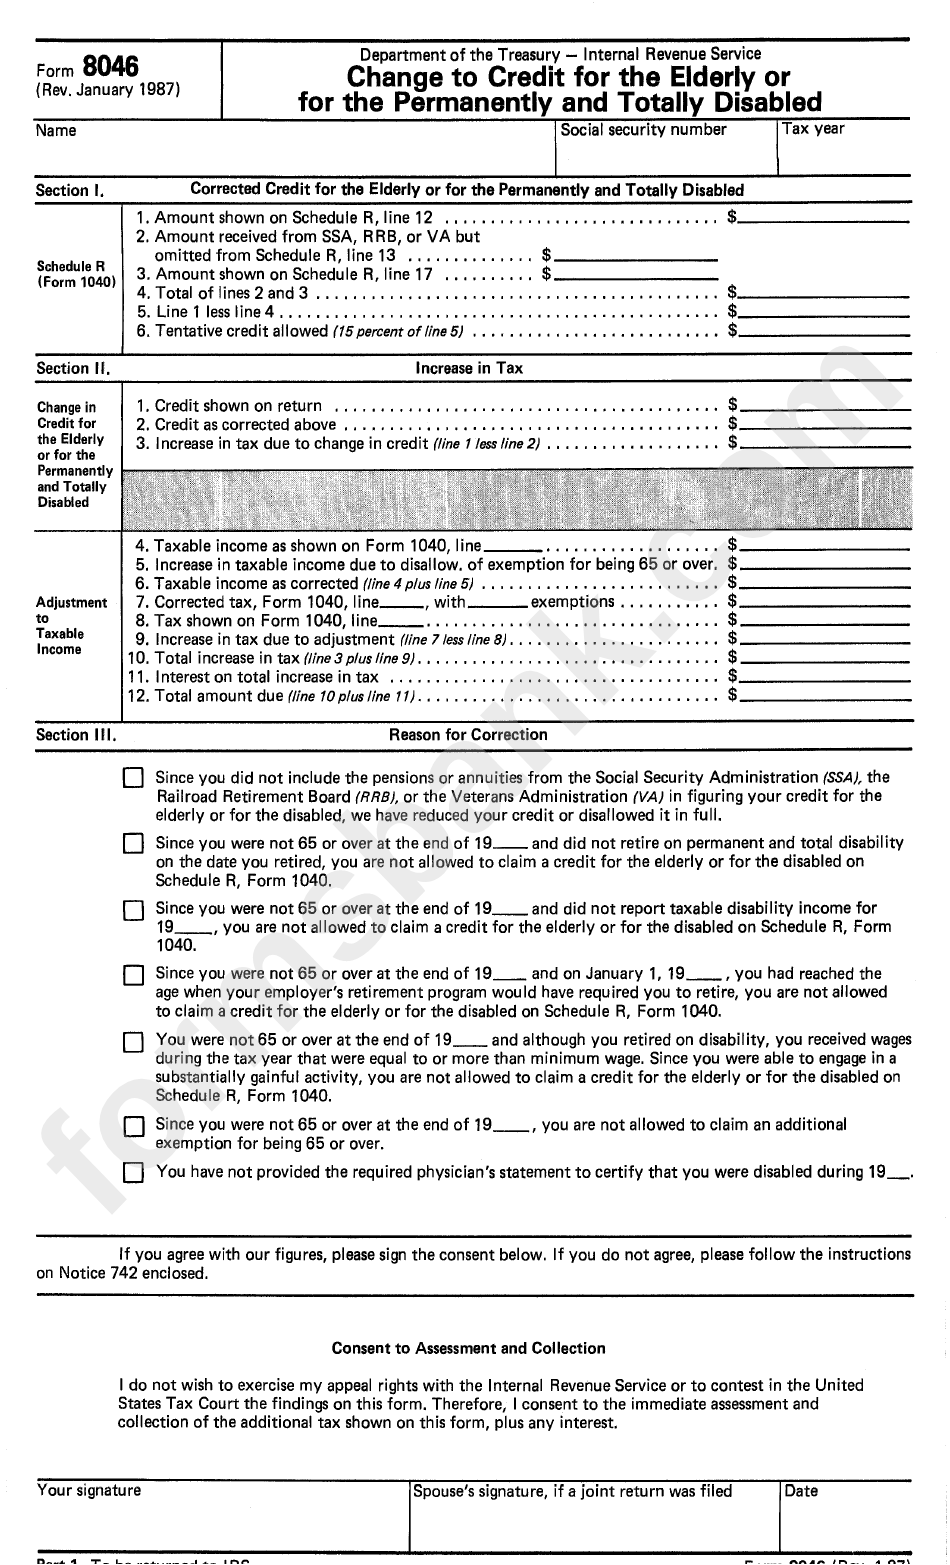 Form 8046 - Change To Credit For The Elderly Or For The Permanently And Totally Disabled